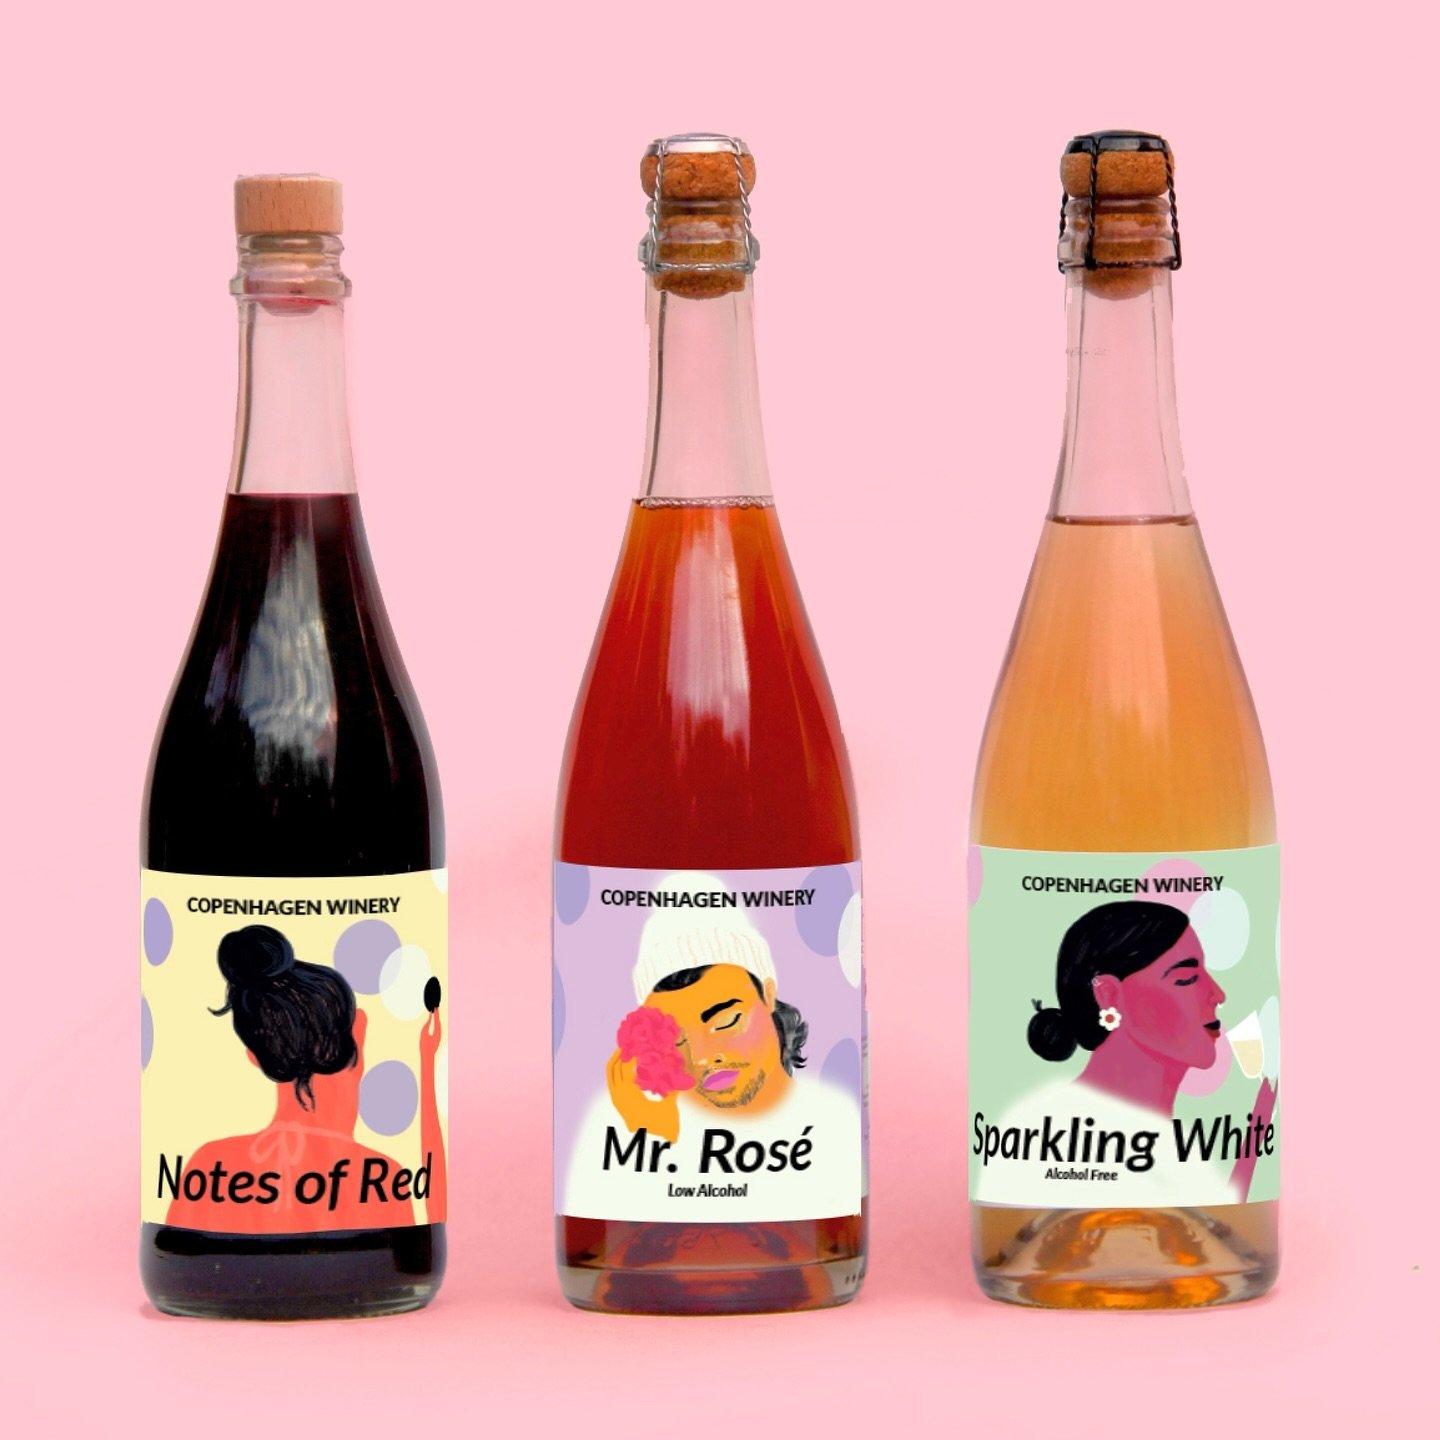 Exciting news 🌸 We have a delicious series of low alcohol wines coming out 🎉

Sparkling White JUST launched on our website and is aromatic, floral, light, dry and with a minimum alcohol. 

It&rsquo;s brewed from flowers and fermented herbs 🌿 

Per